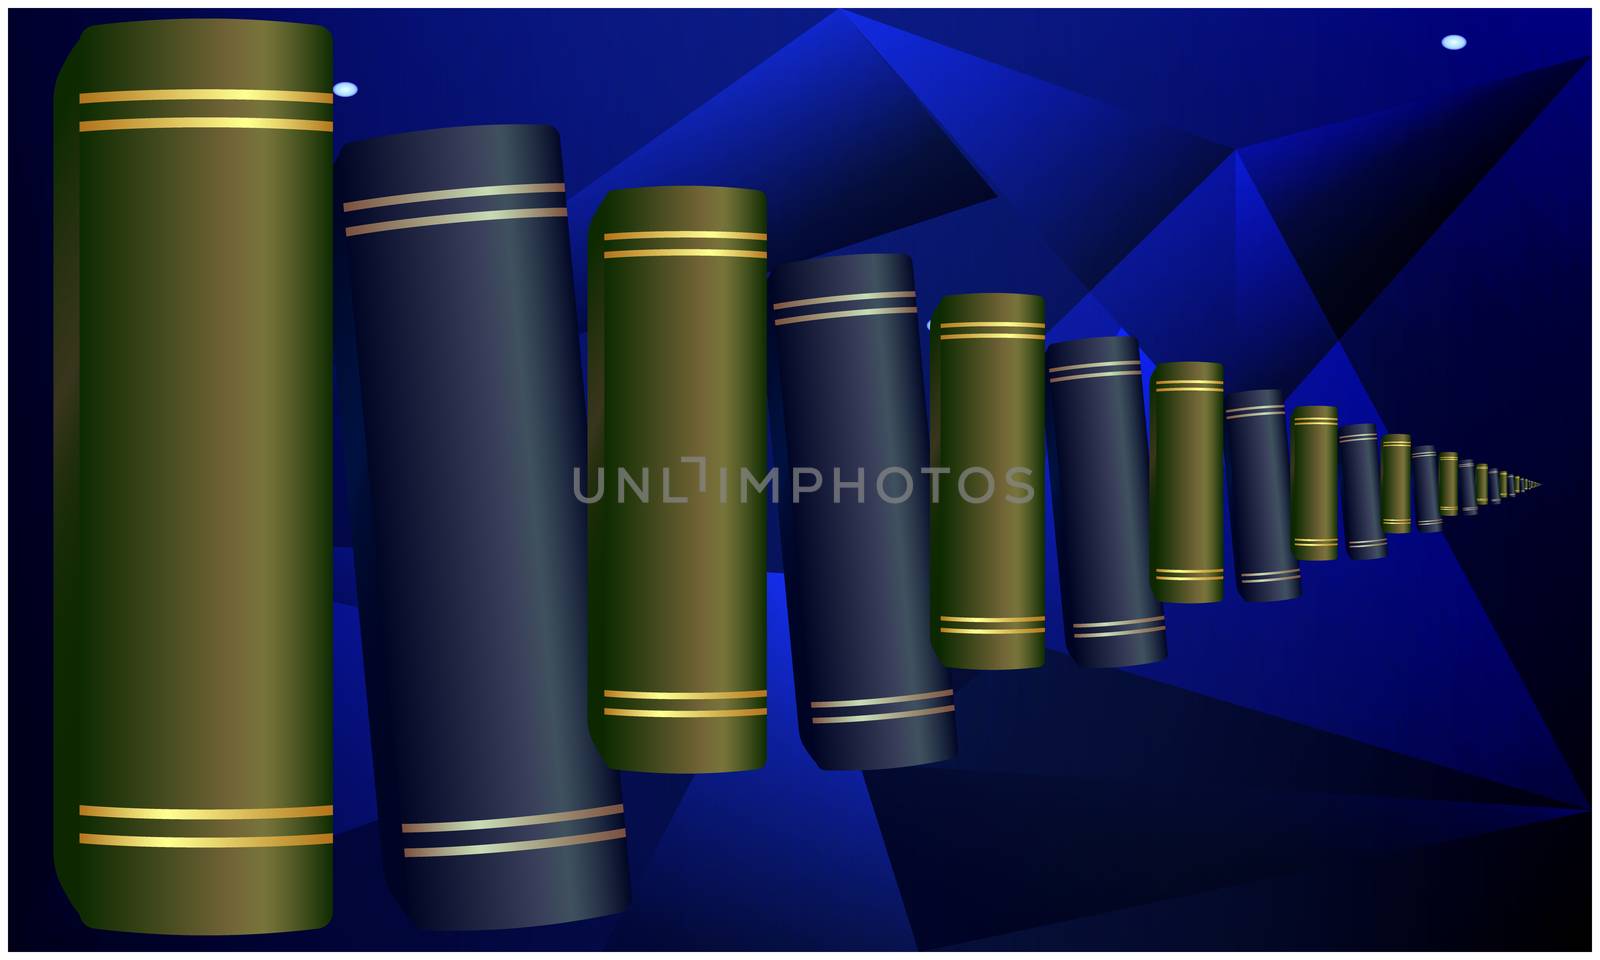 digital textile design of books on abstract background